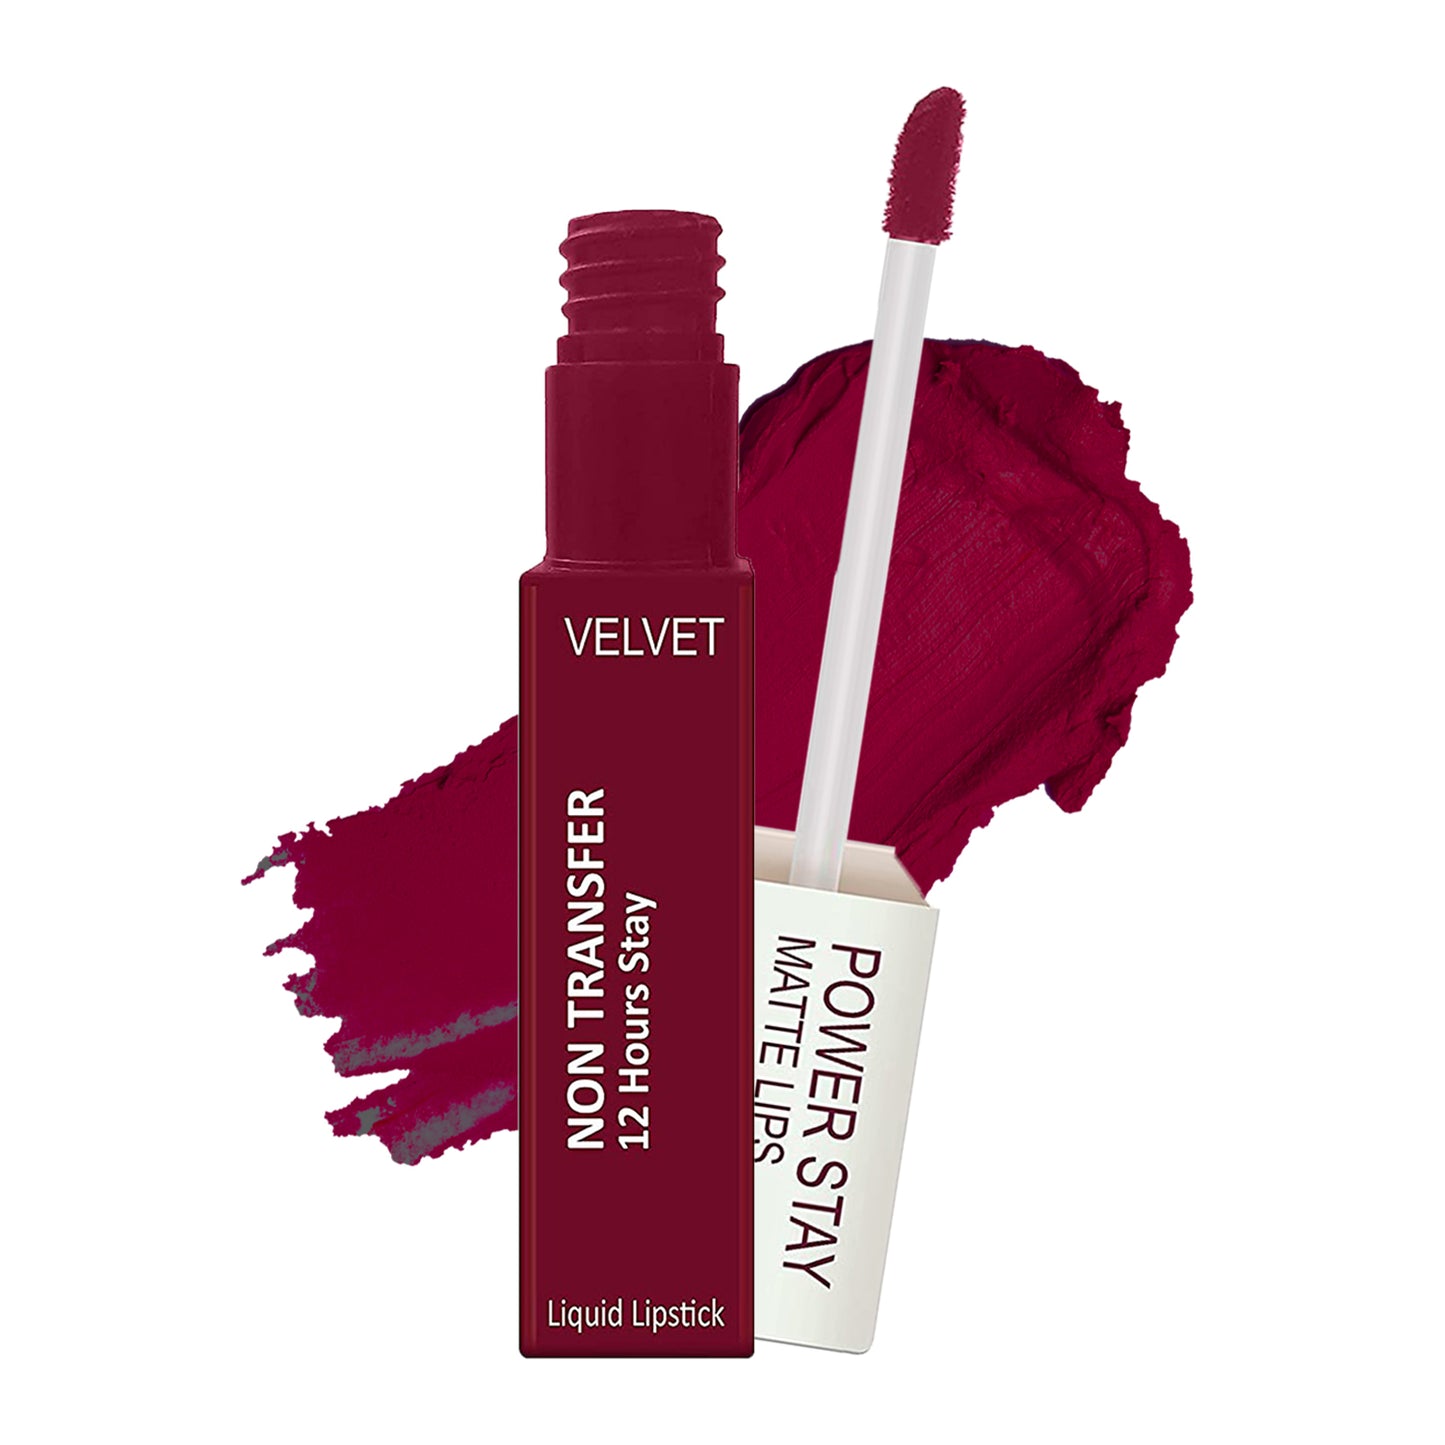 Krayons Power Stay Nontransfer 12hrs Stay Matte Liquid Lipstick, Maroon Magic, Mask Proof, Smudgeproof, Longlasting, 4ml